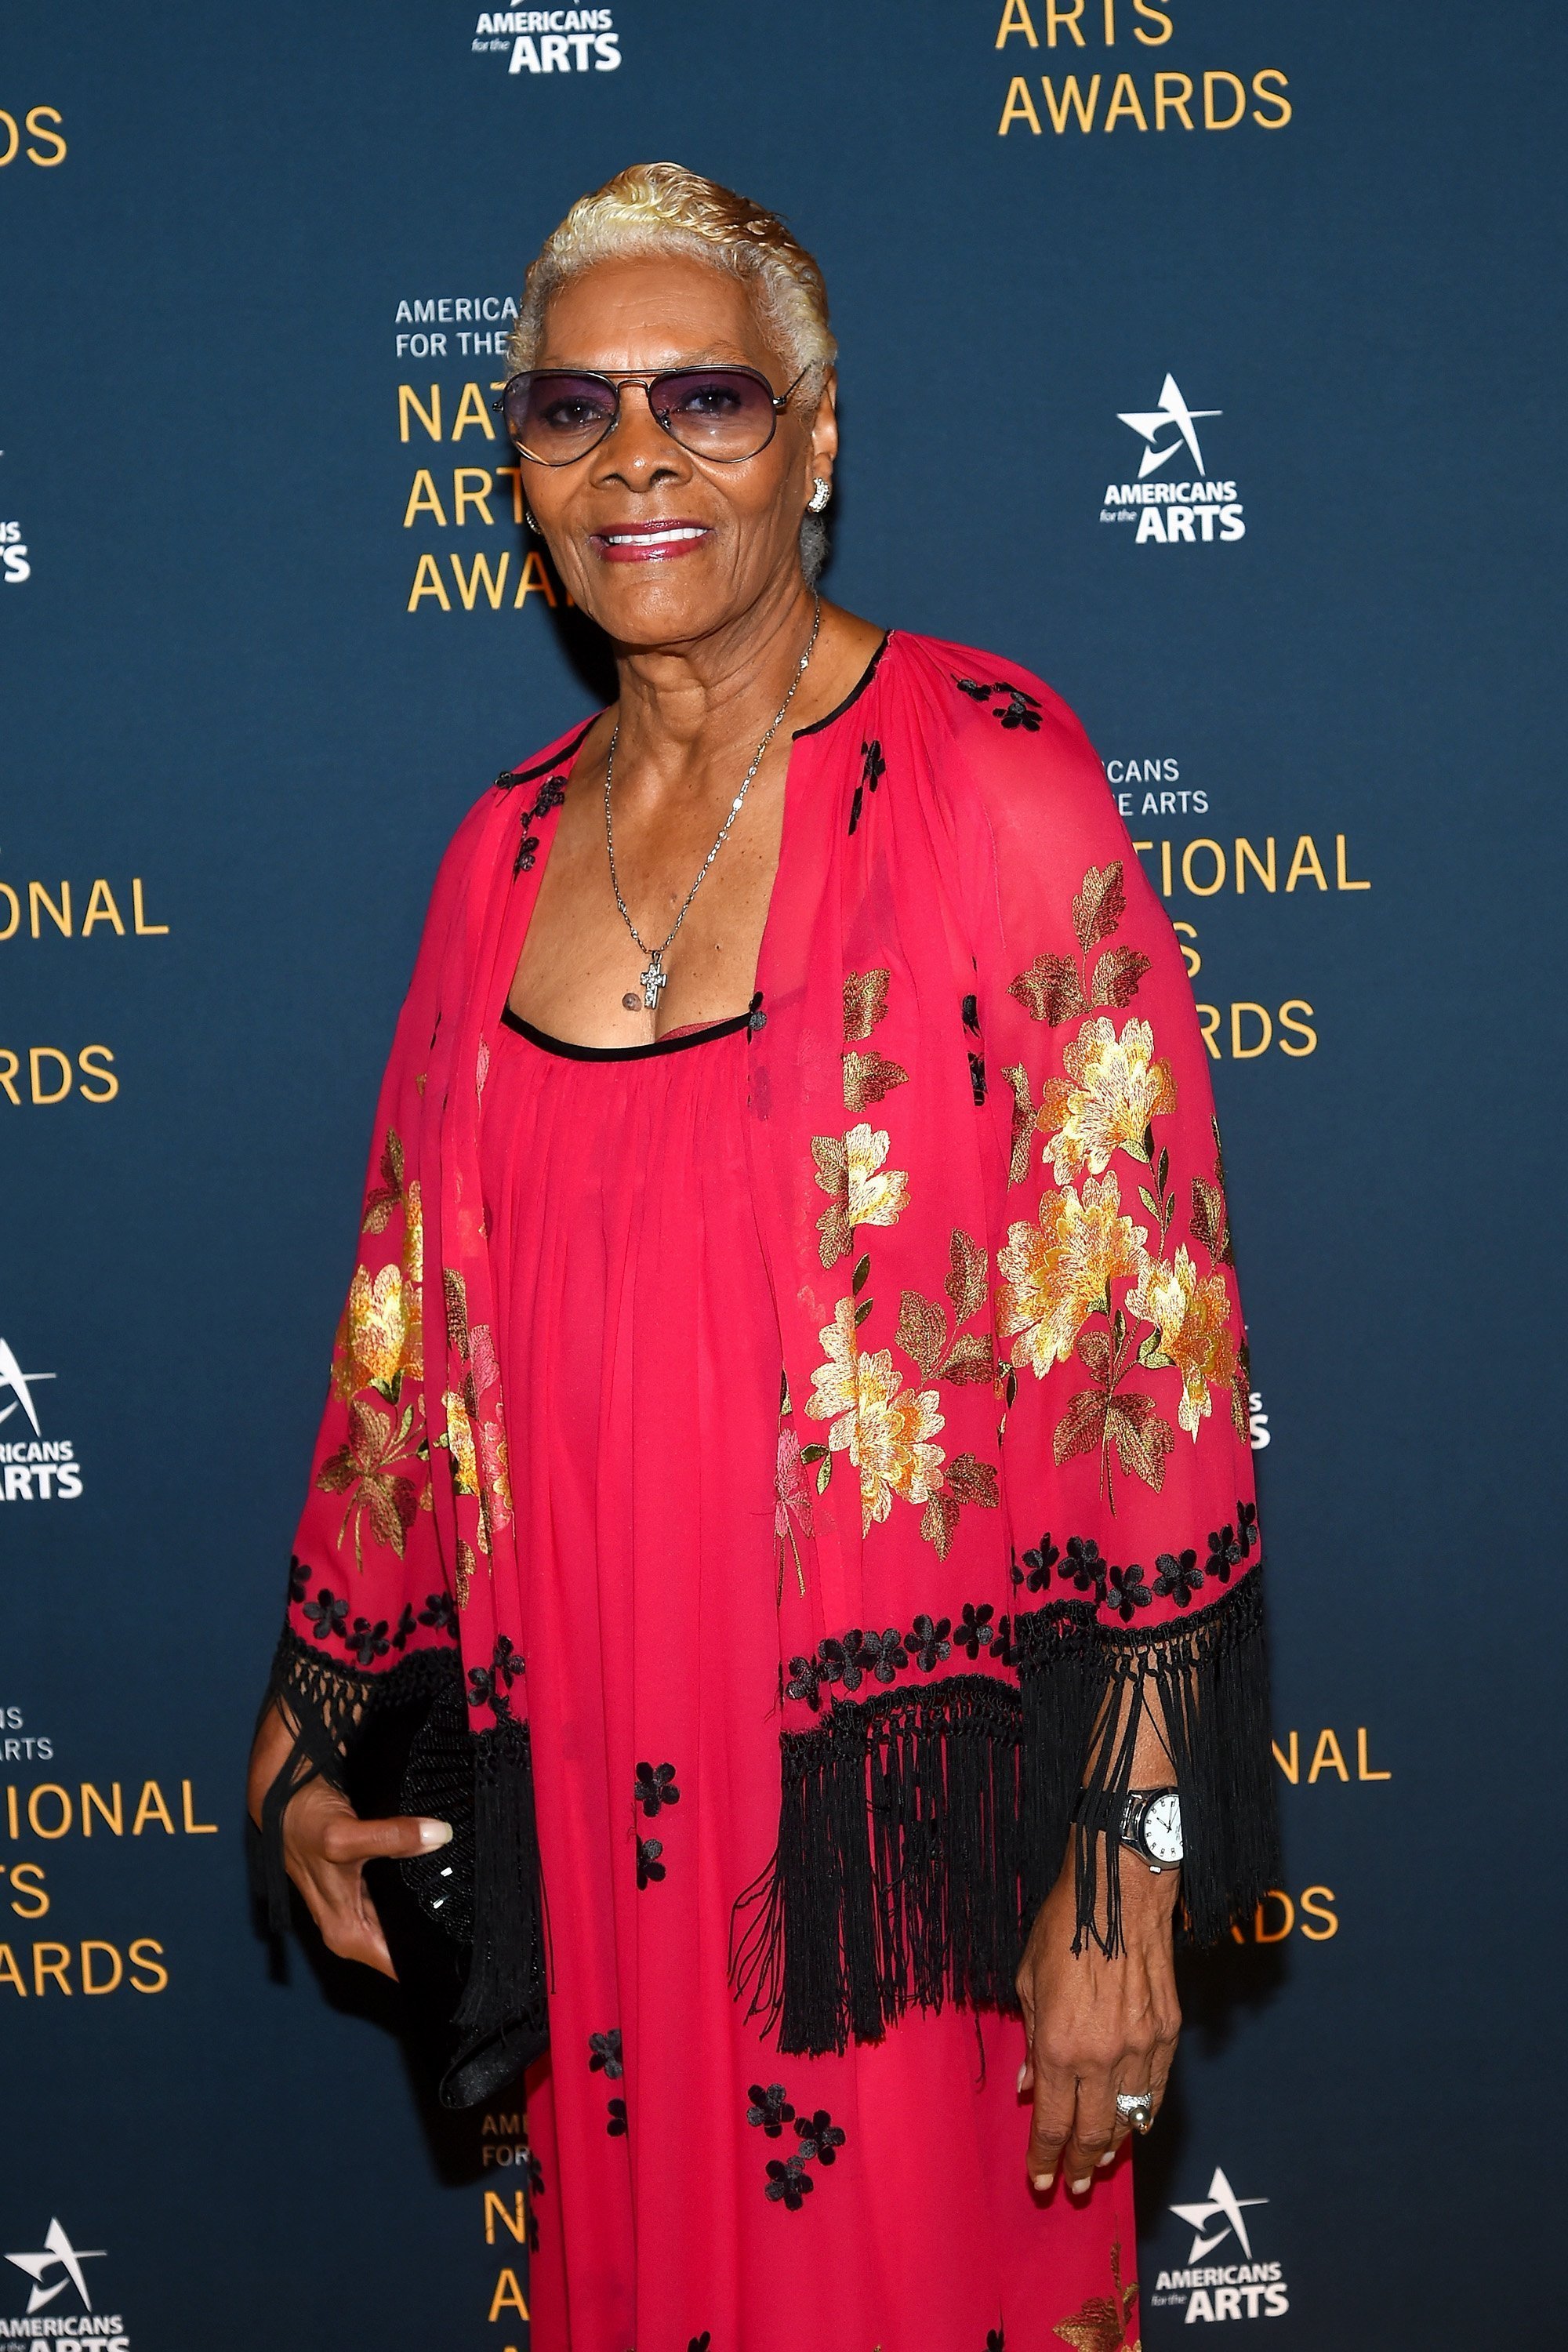 Dionne Warwick at the National Art Awards in October 2017. | Source: Getty Images